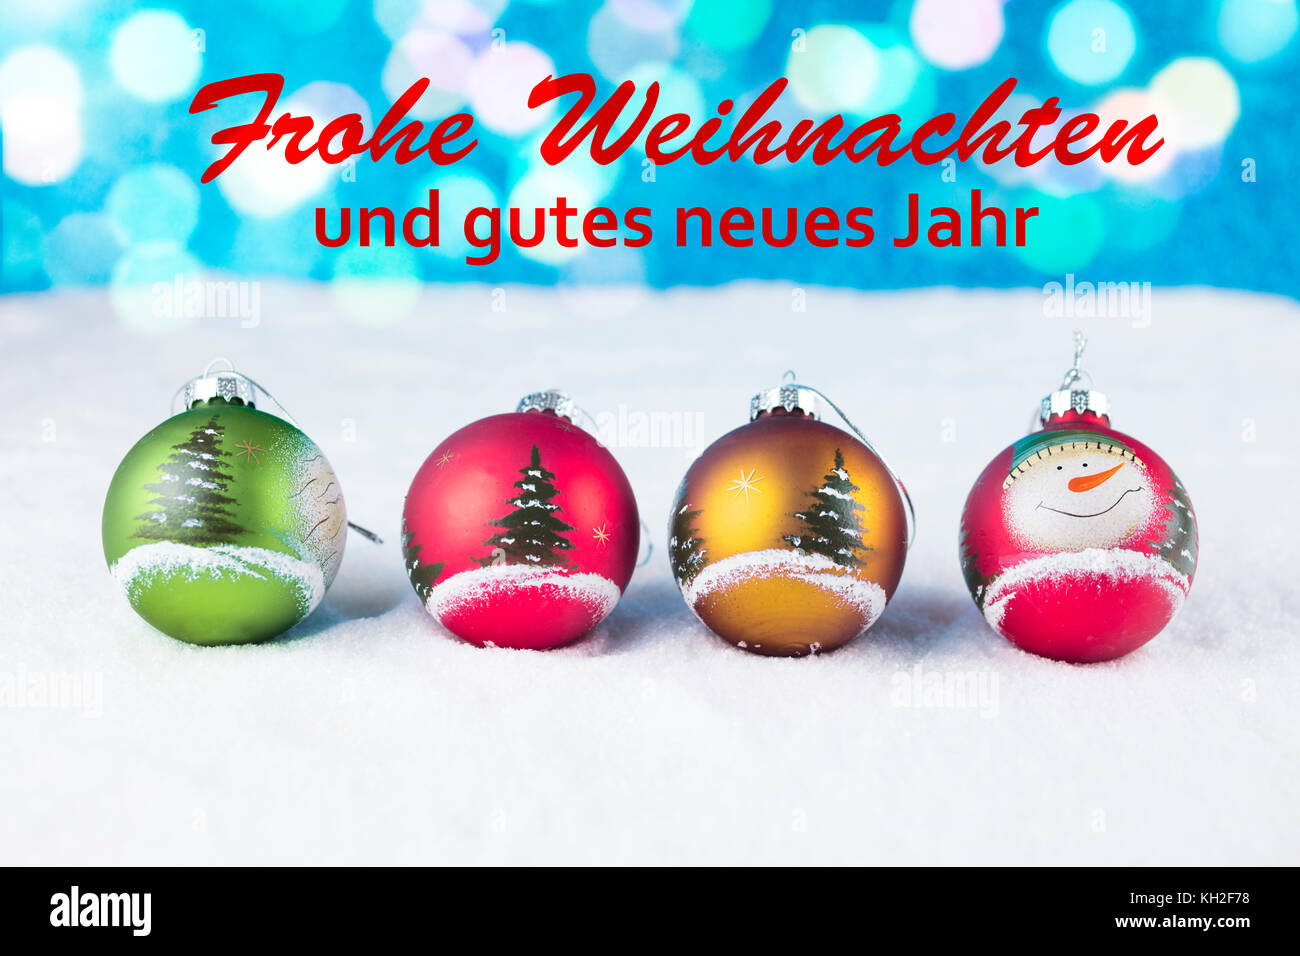 Group of colorful Christmas balls with text in German 'Frohe Weihnachten und gutes neues Jahr' in white snow background. Stock Photo